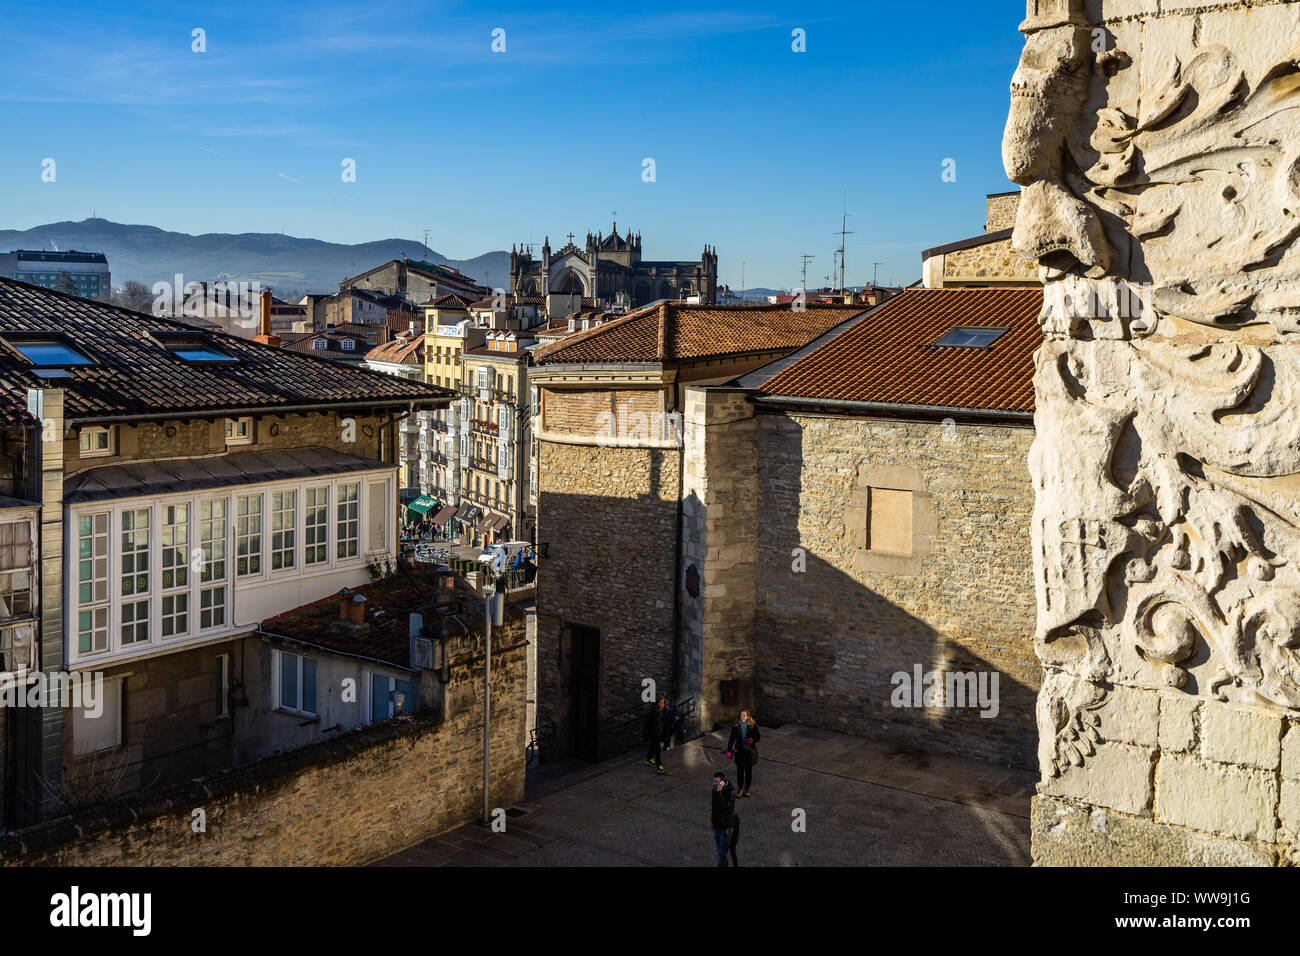 Cityscape of Vitoria-Gasteiz historic center, with Virgen Blanca Square and the New Cathedral in the background, Basque Country, Spain Stock Photo